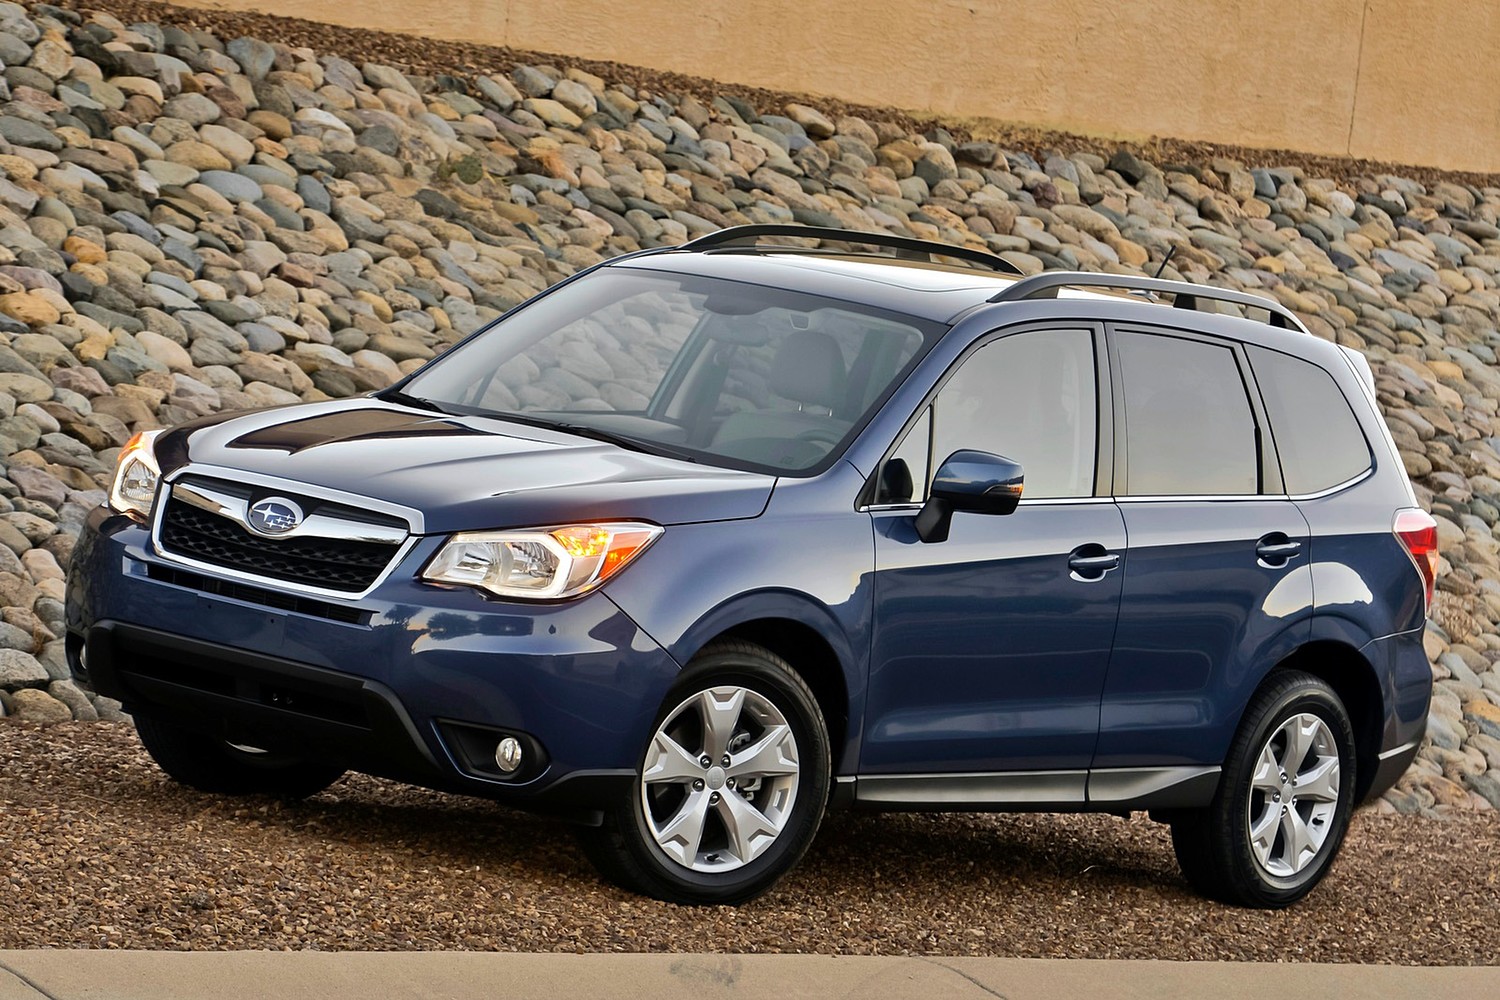 Subaru Forester 2.5i Limited PZEV 4dr SUV Exterior Shown (2015 model year shown)